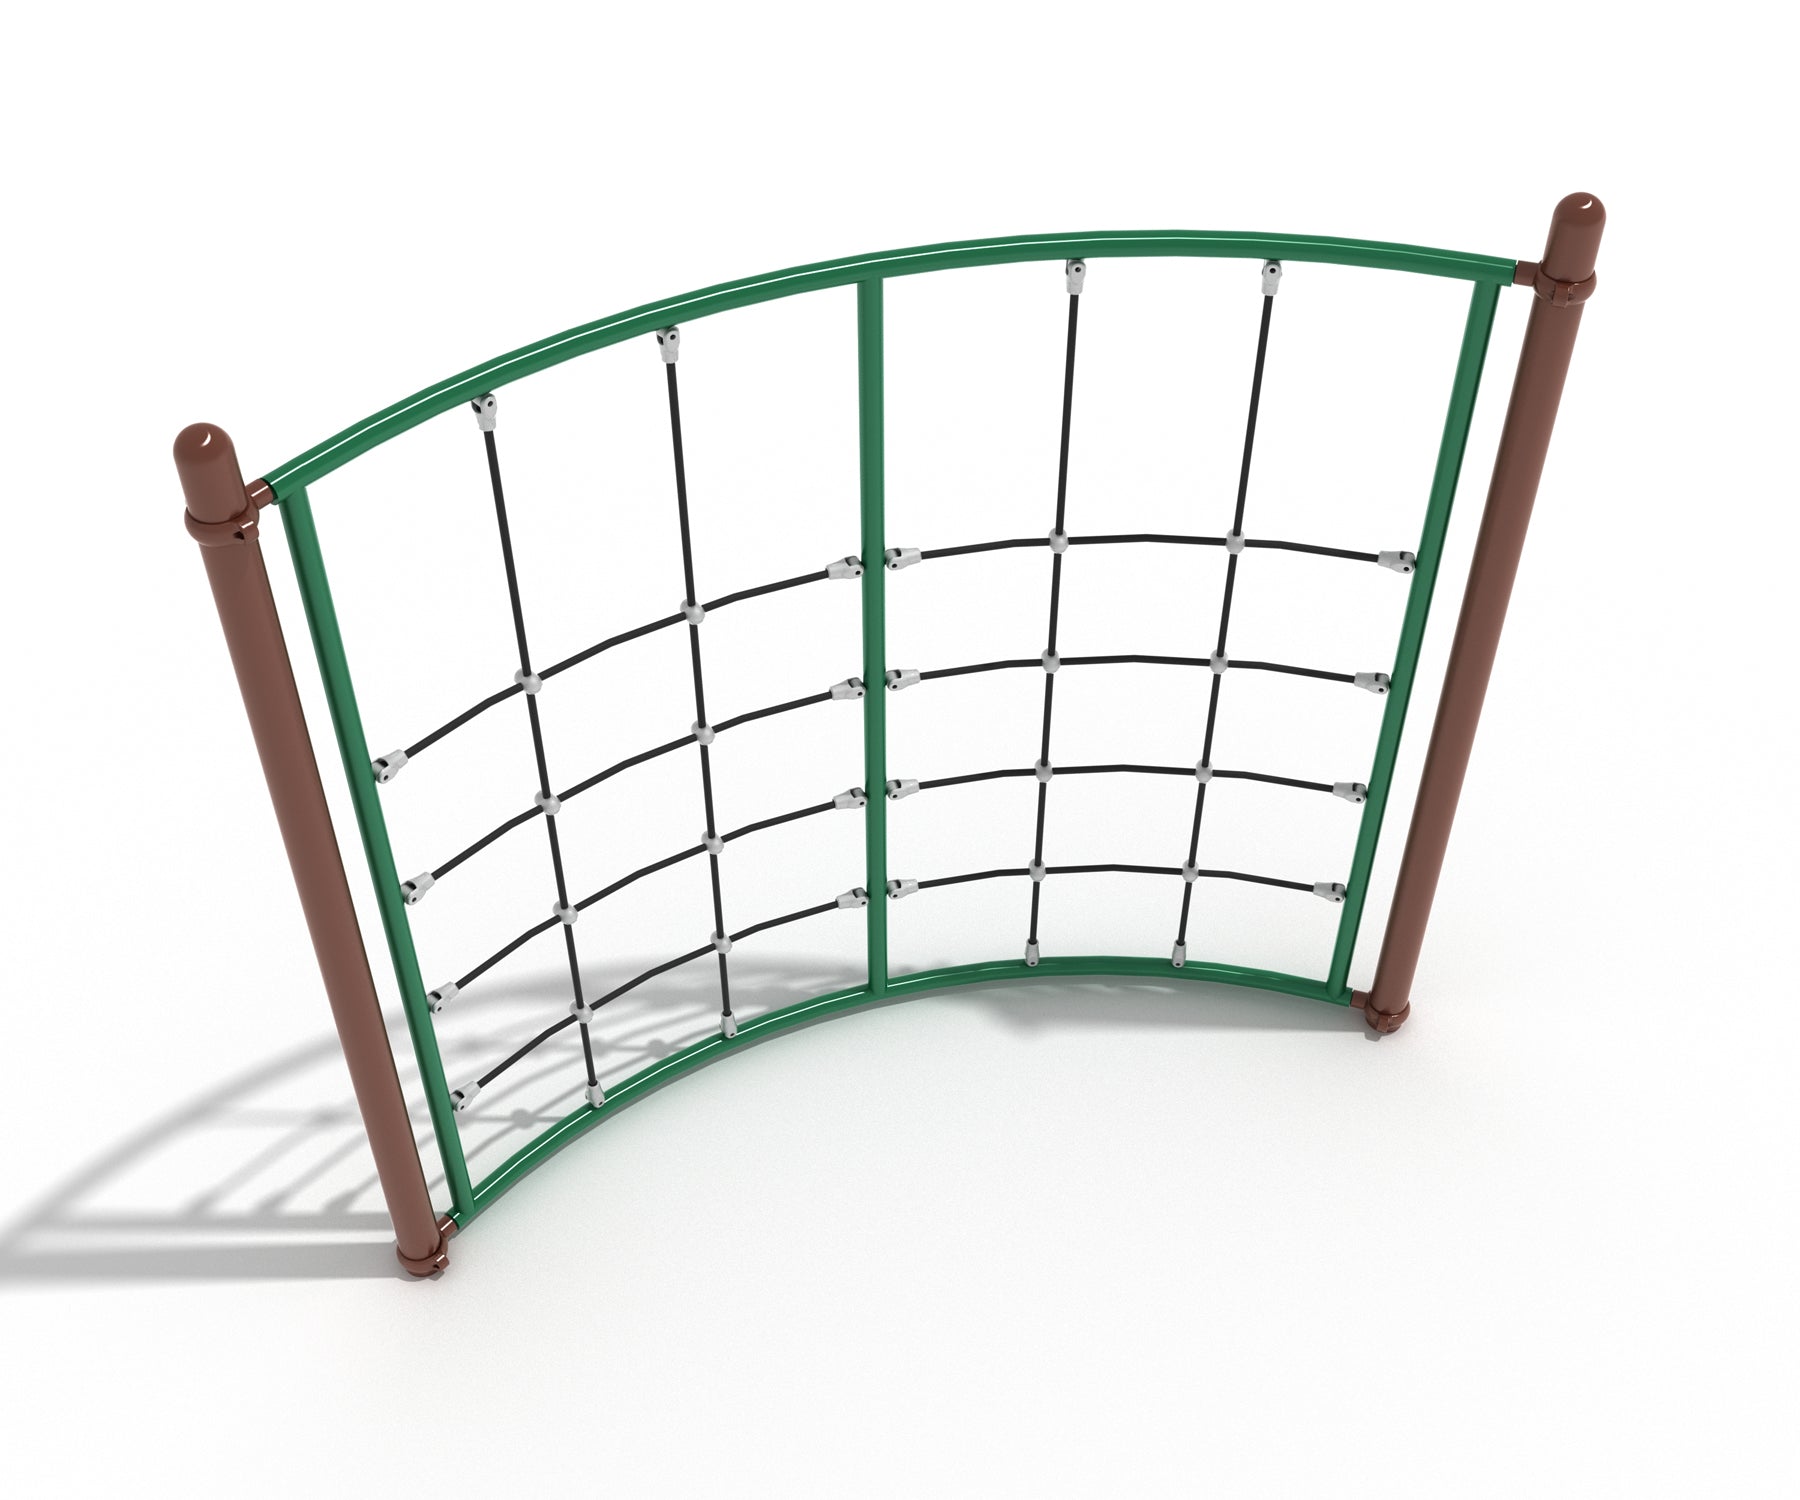 Playground-Equipment-Commercial-Curved-Net-Climber